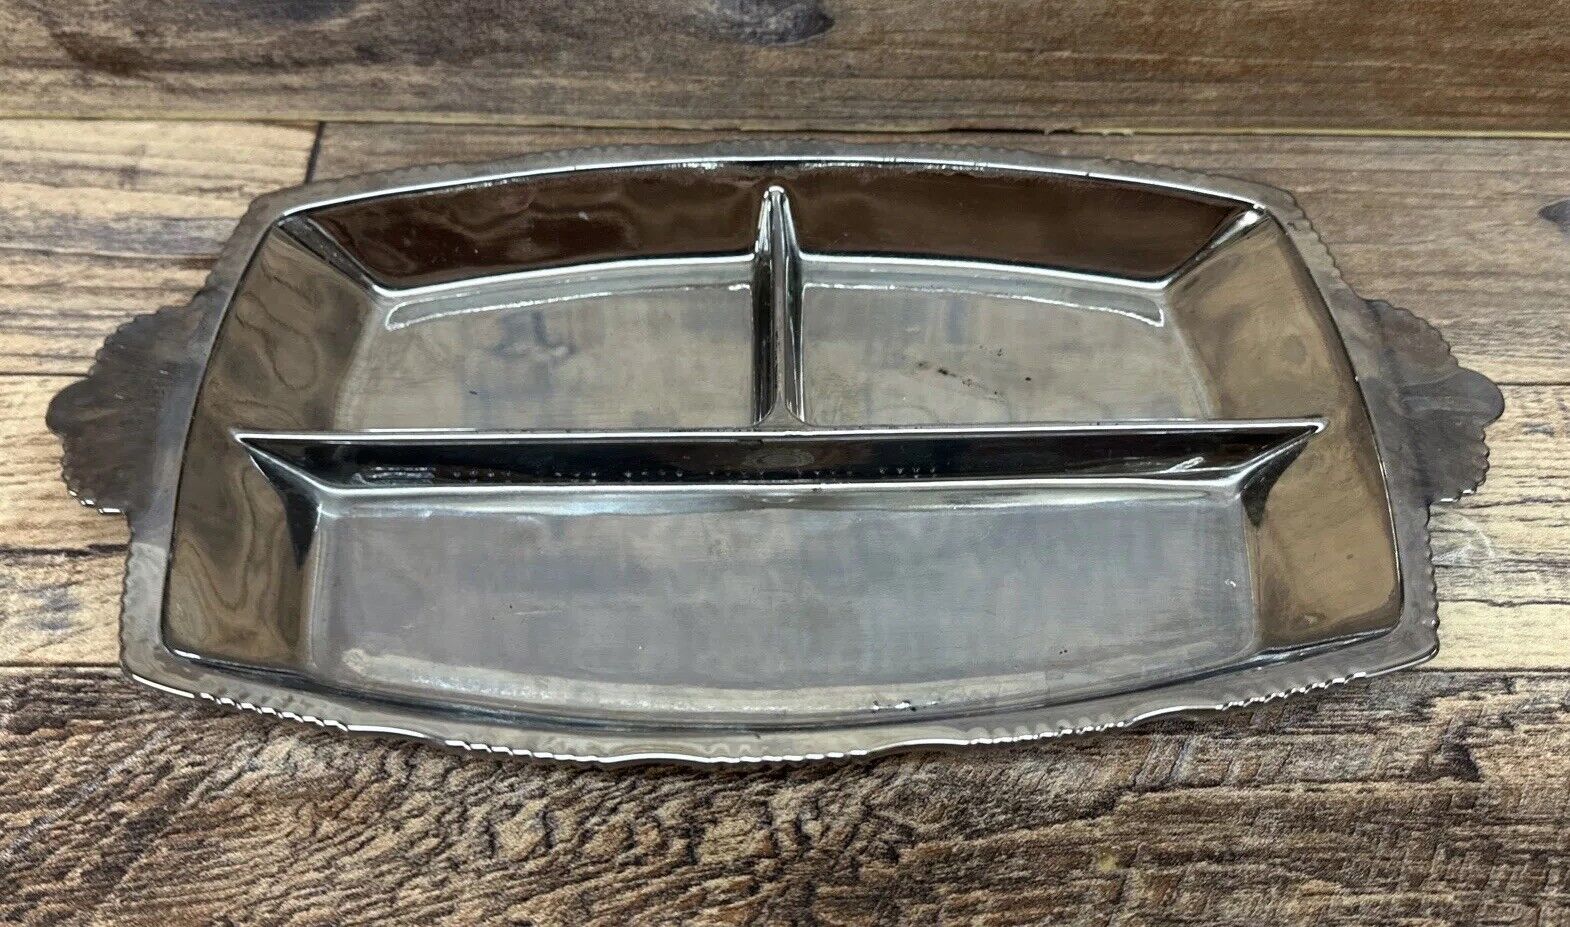 Small Silver Snack Dish - Vintage - Oblong Trinket Dish Candy Holder Home Decor